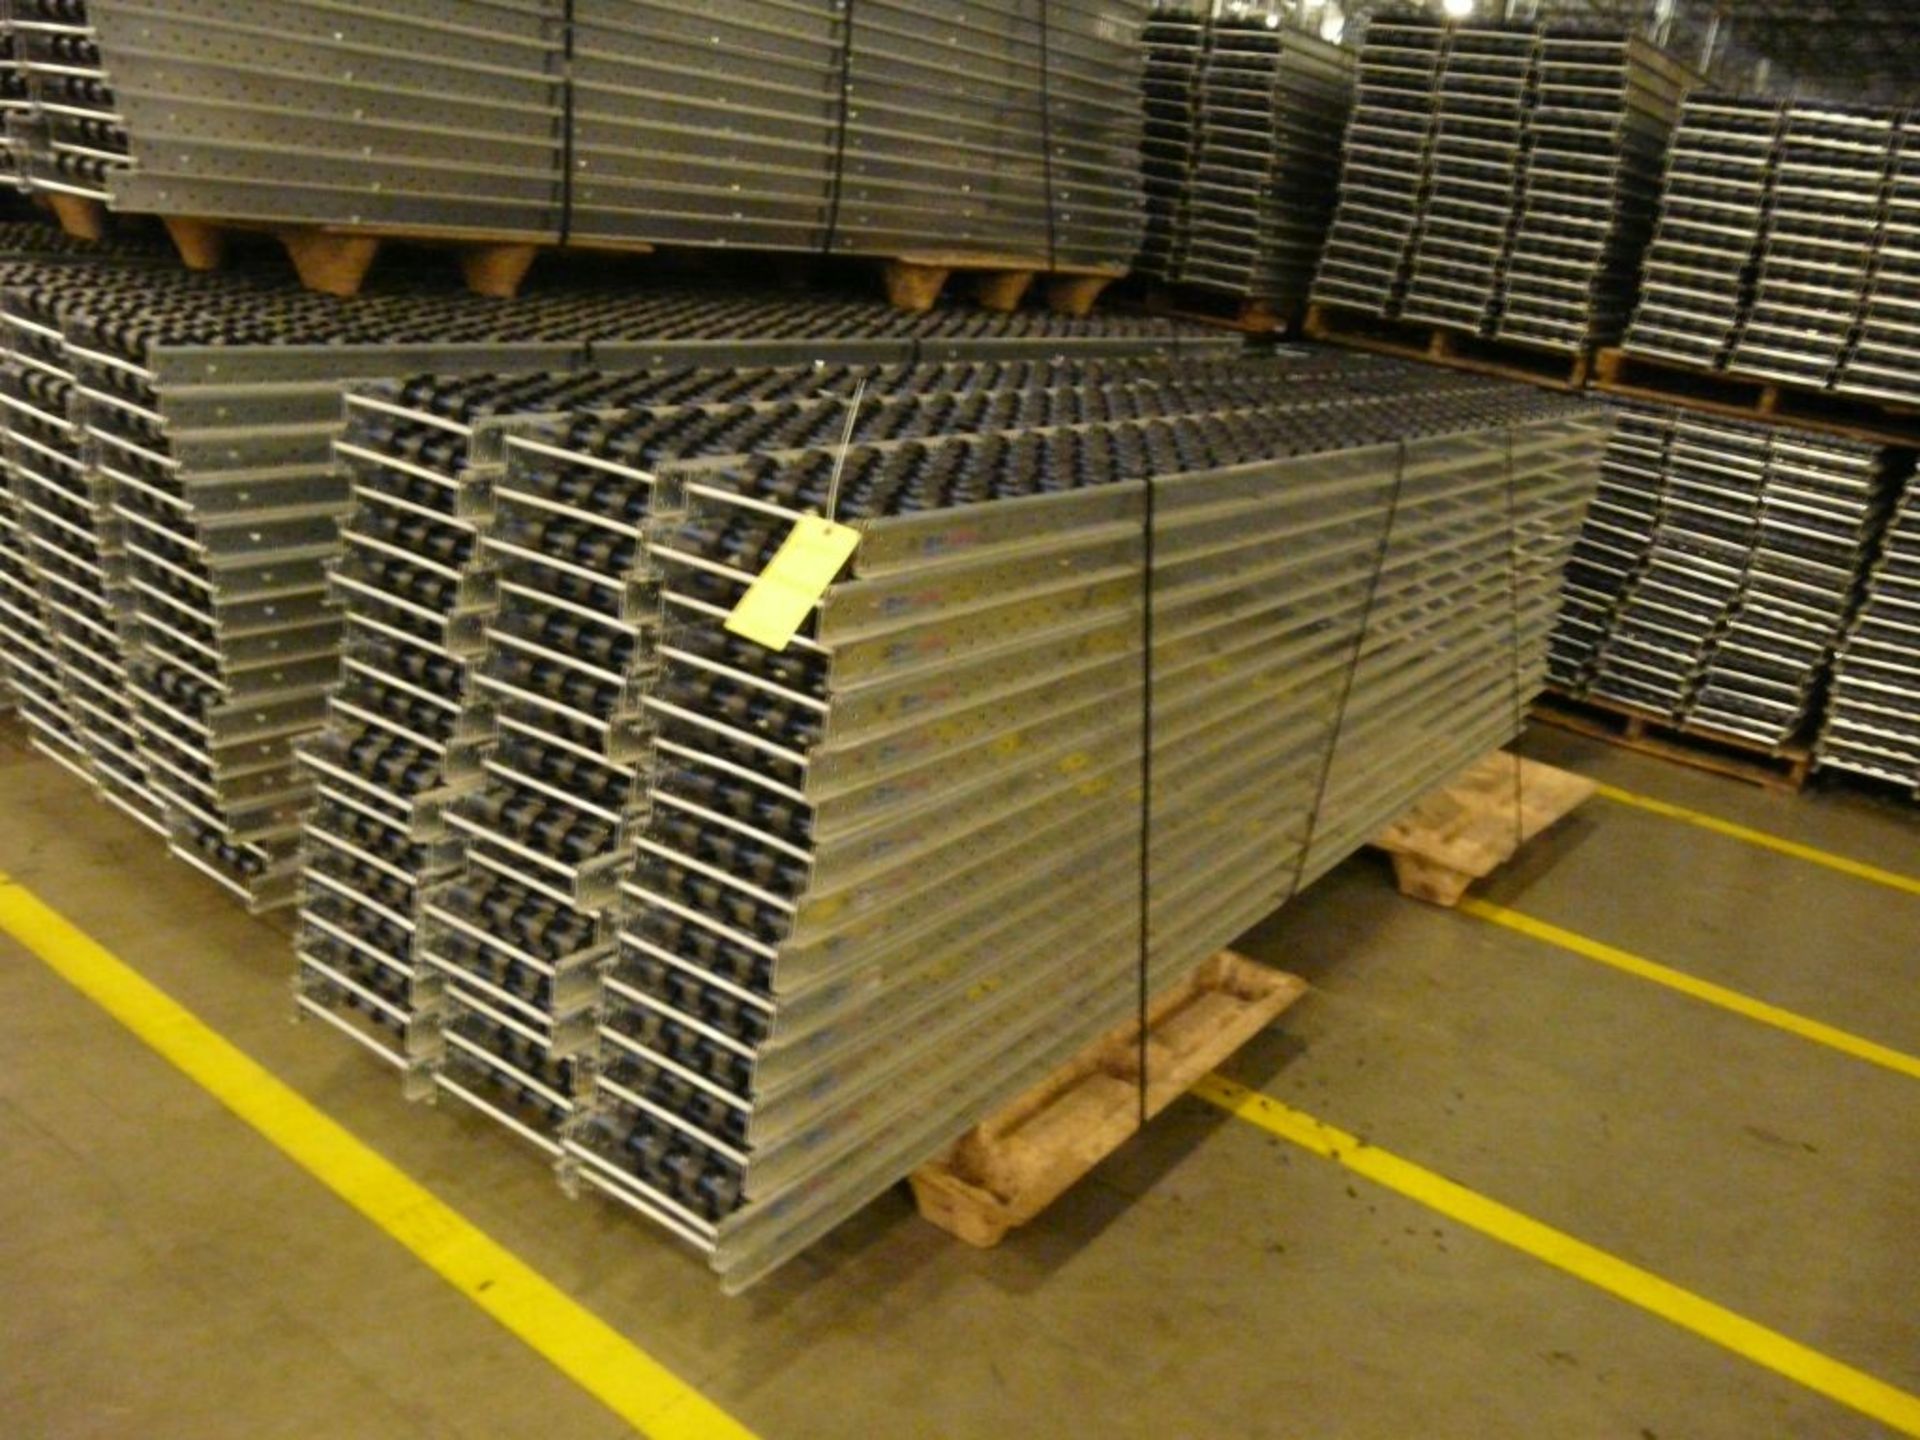 Lot of (90) SpanTrack Wheelbed Carton Flow Conveyors - 11.5'L x 11"W; Tag: 224221 - $30 Lot